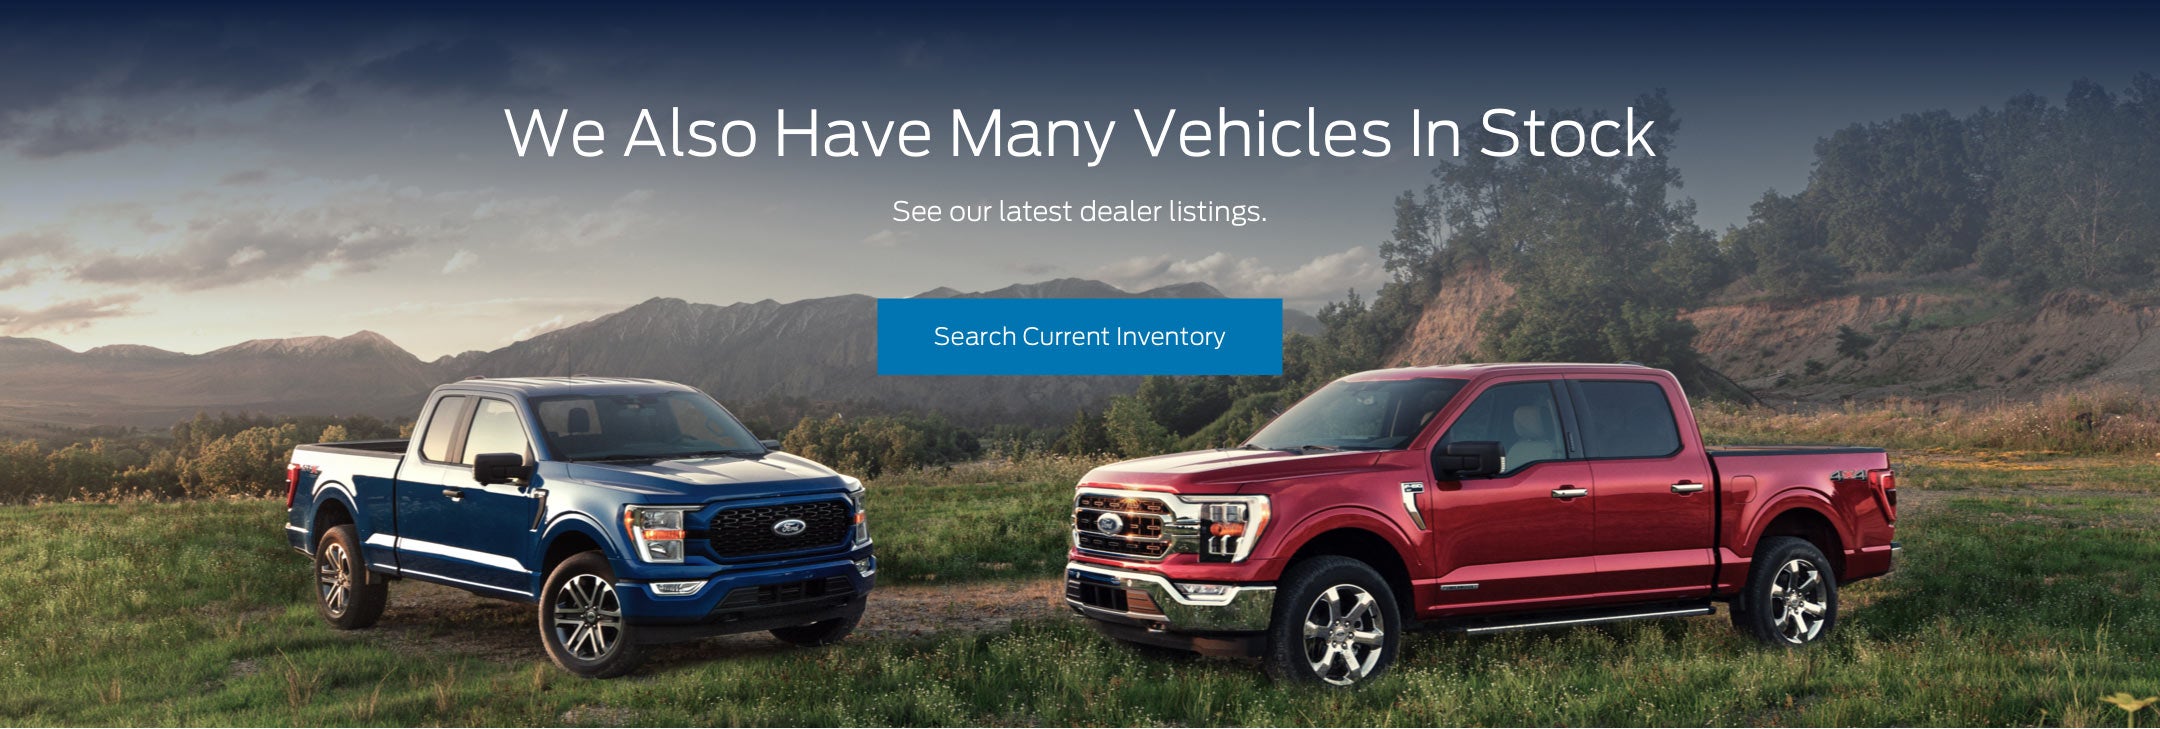 Ford vehicles in stock | Midland Ford in Midland MI